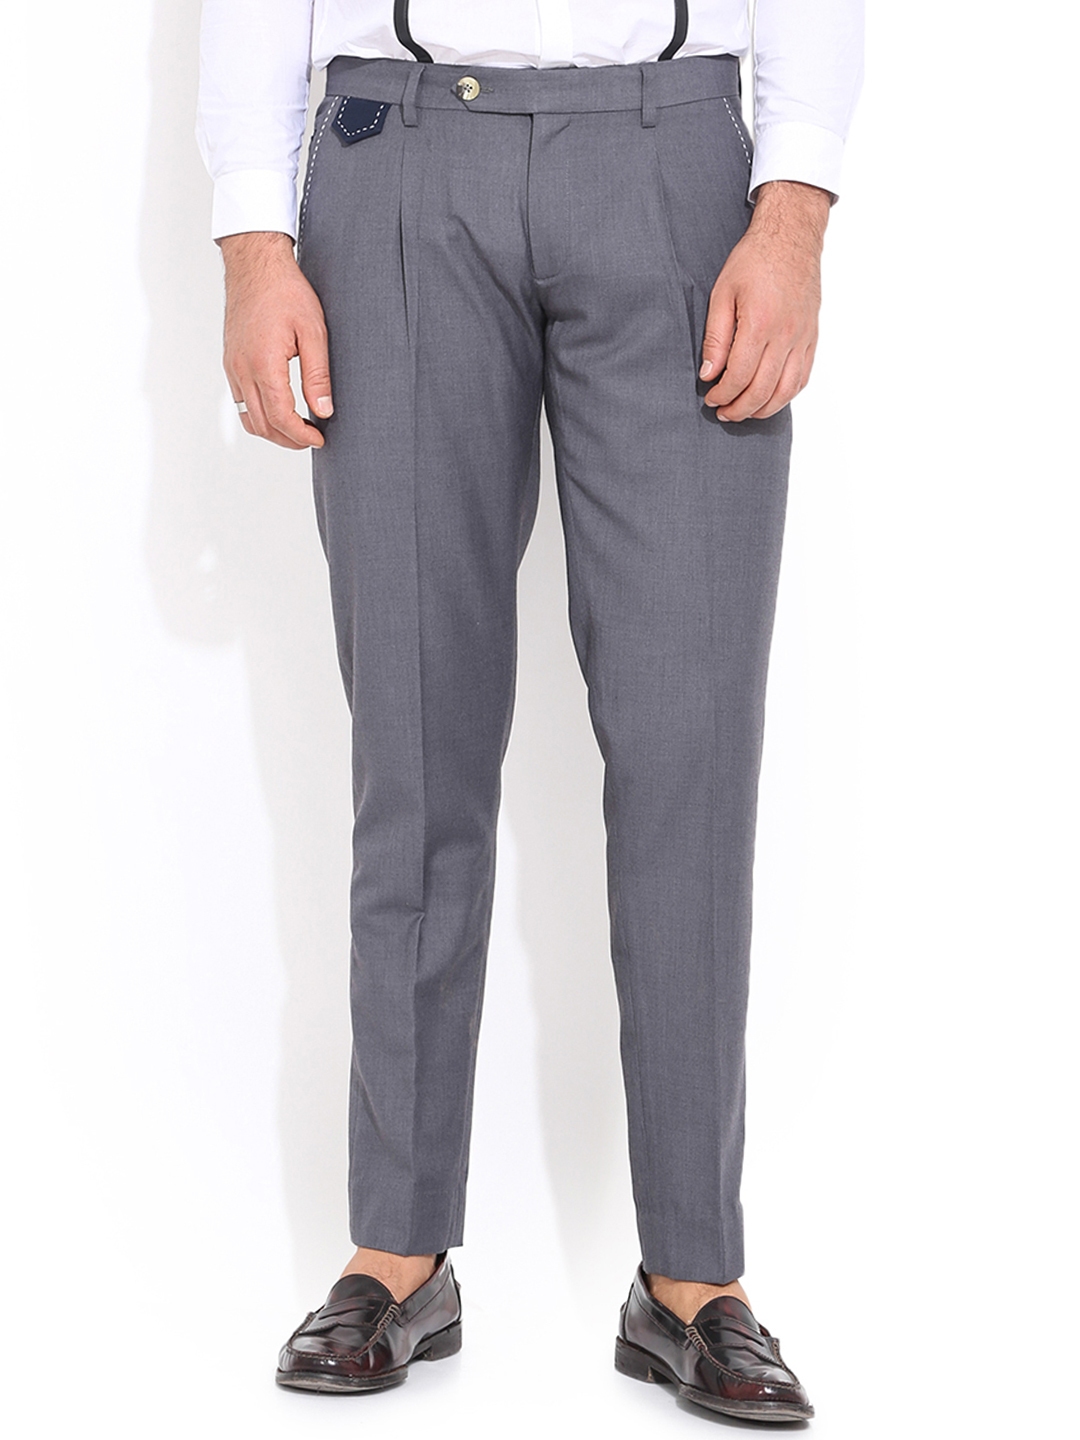 Buy MR BUTTON Grey Slim Fit Trousers - Trousers for Men 1144810 | Myntra